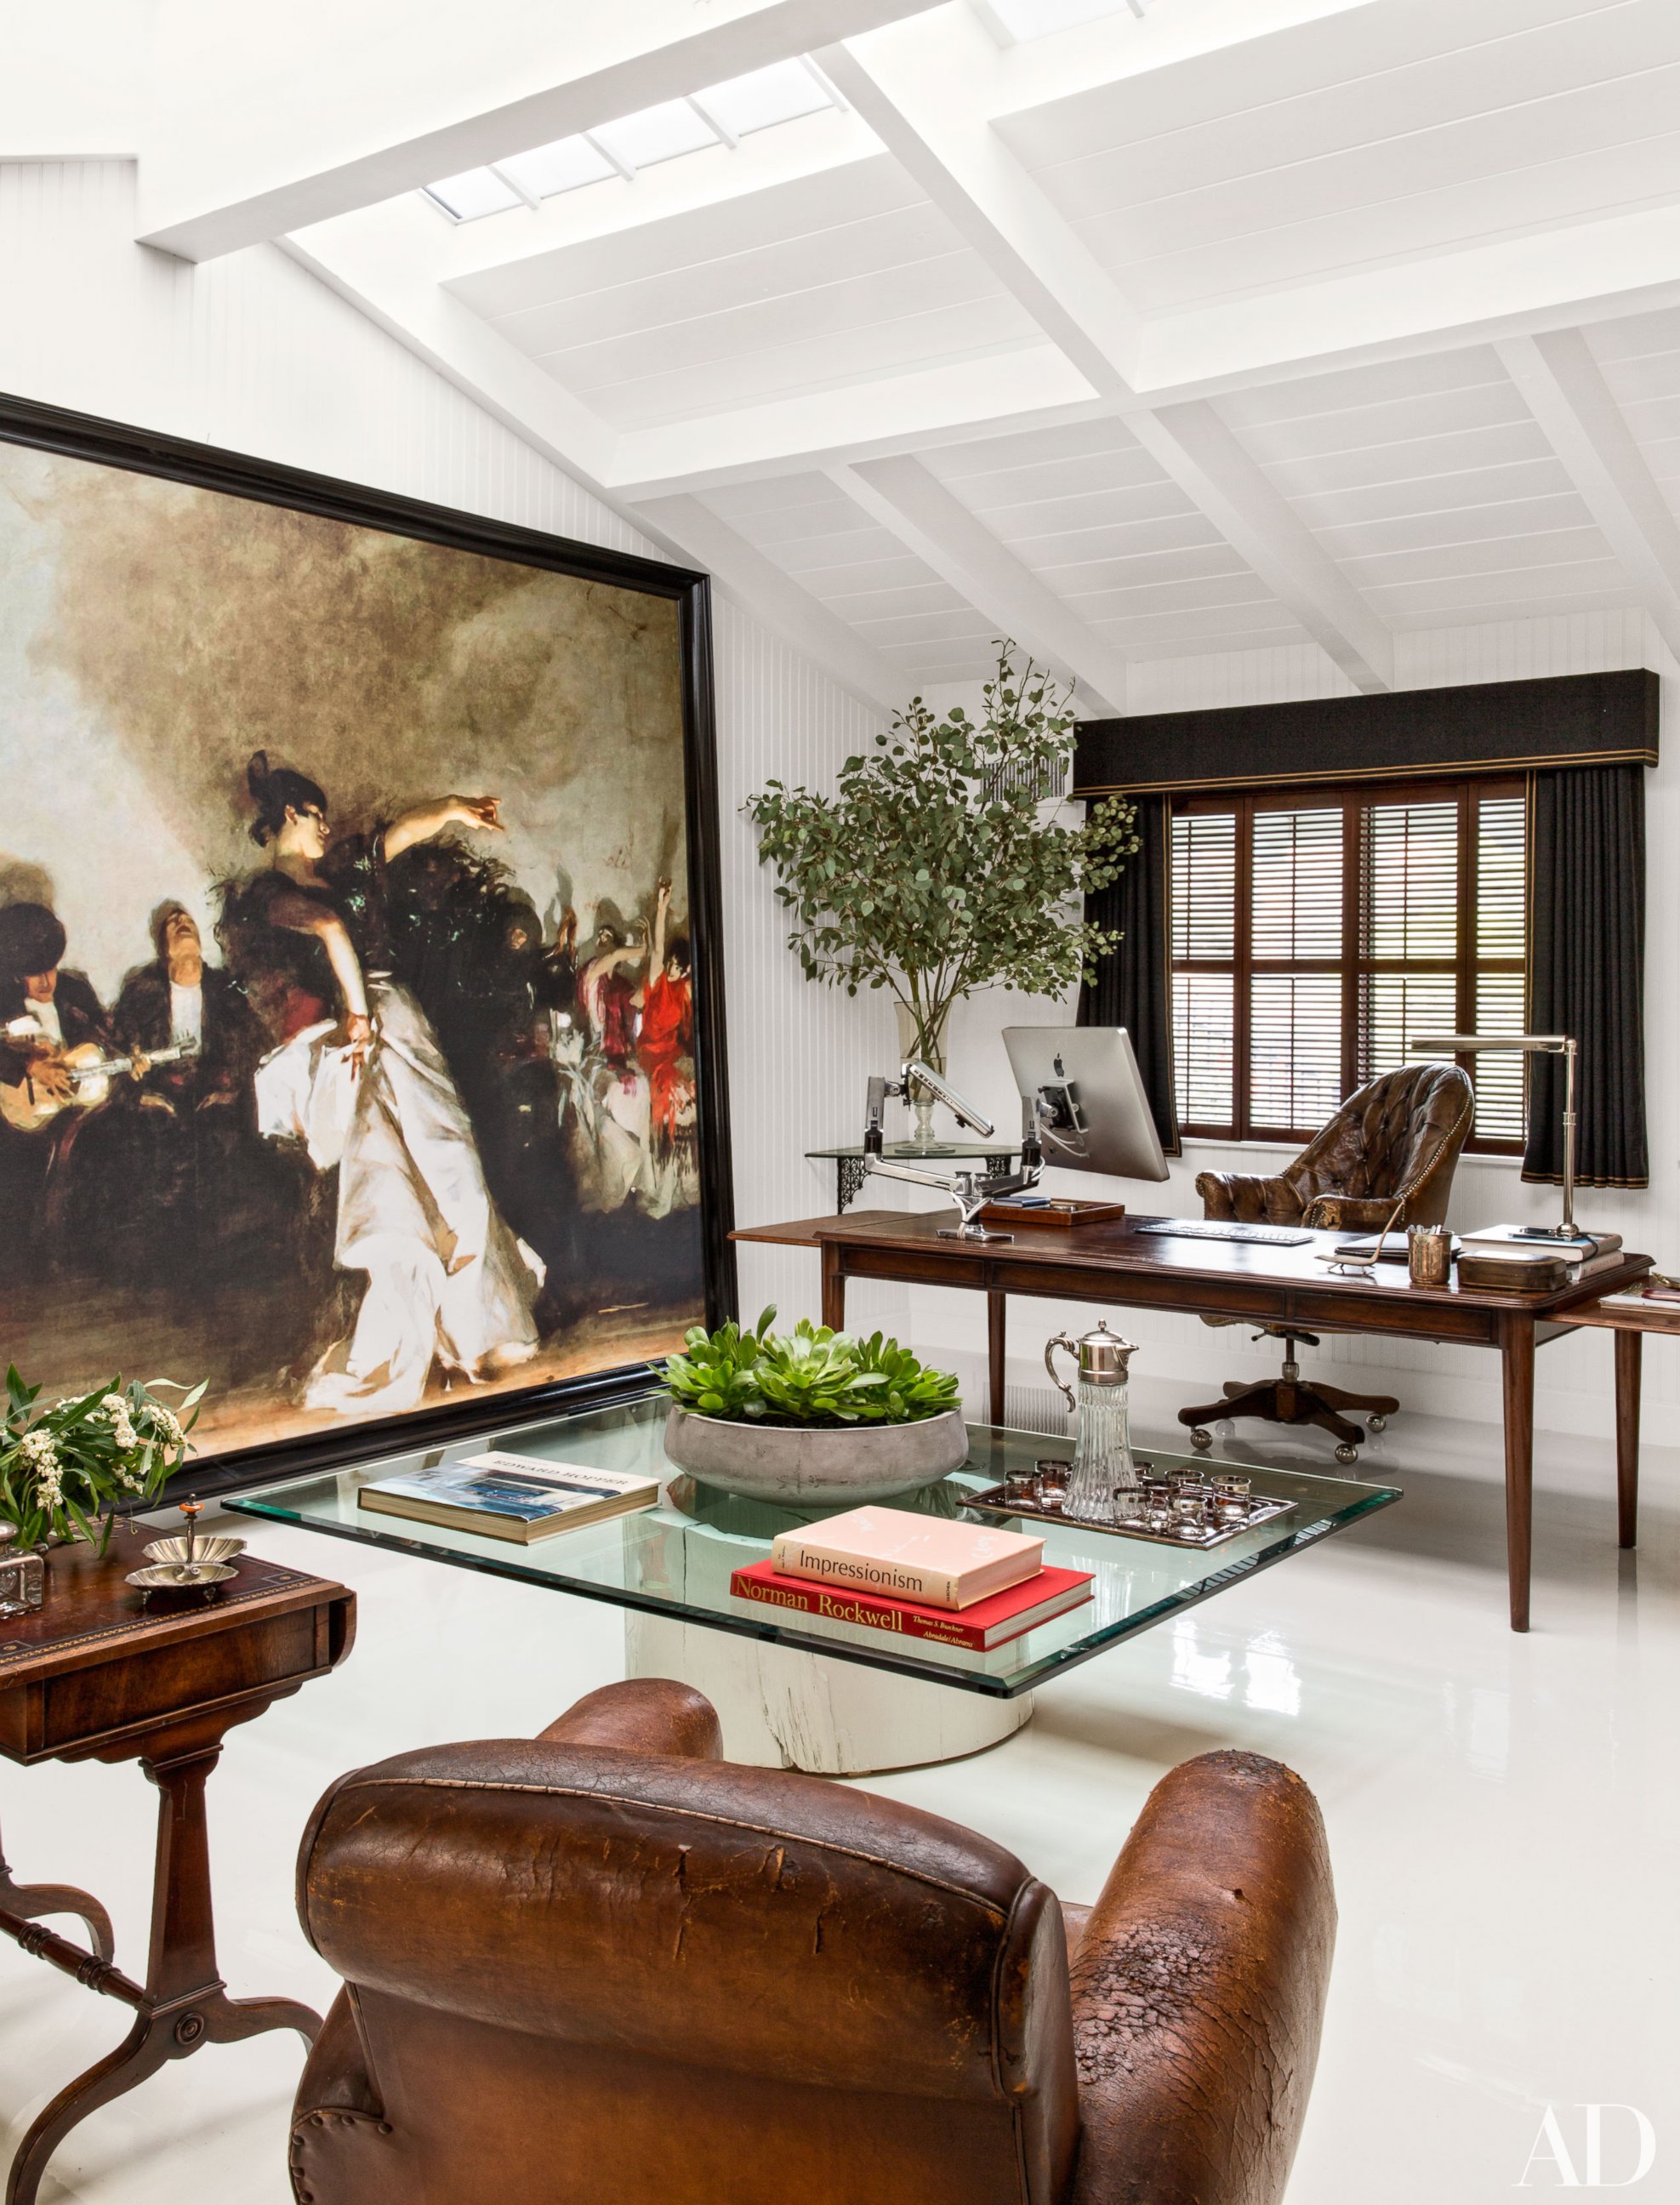 PHOTO: Will Kopelman's personal home retreat is featured in Architectural Digest.